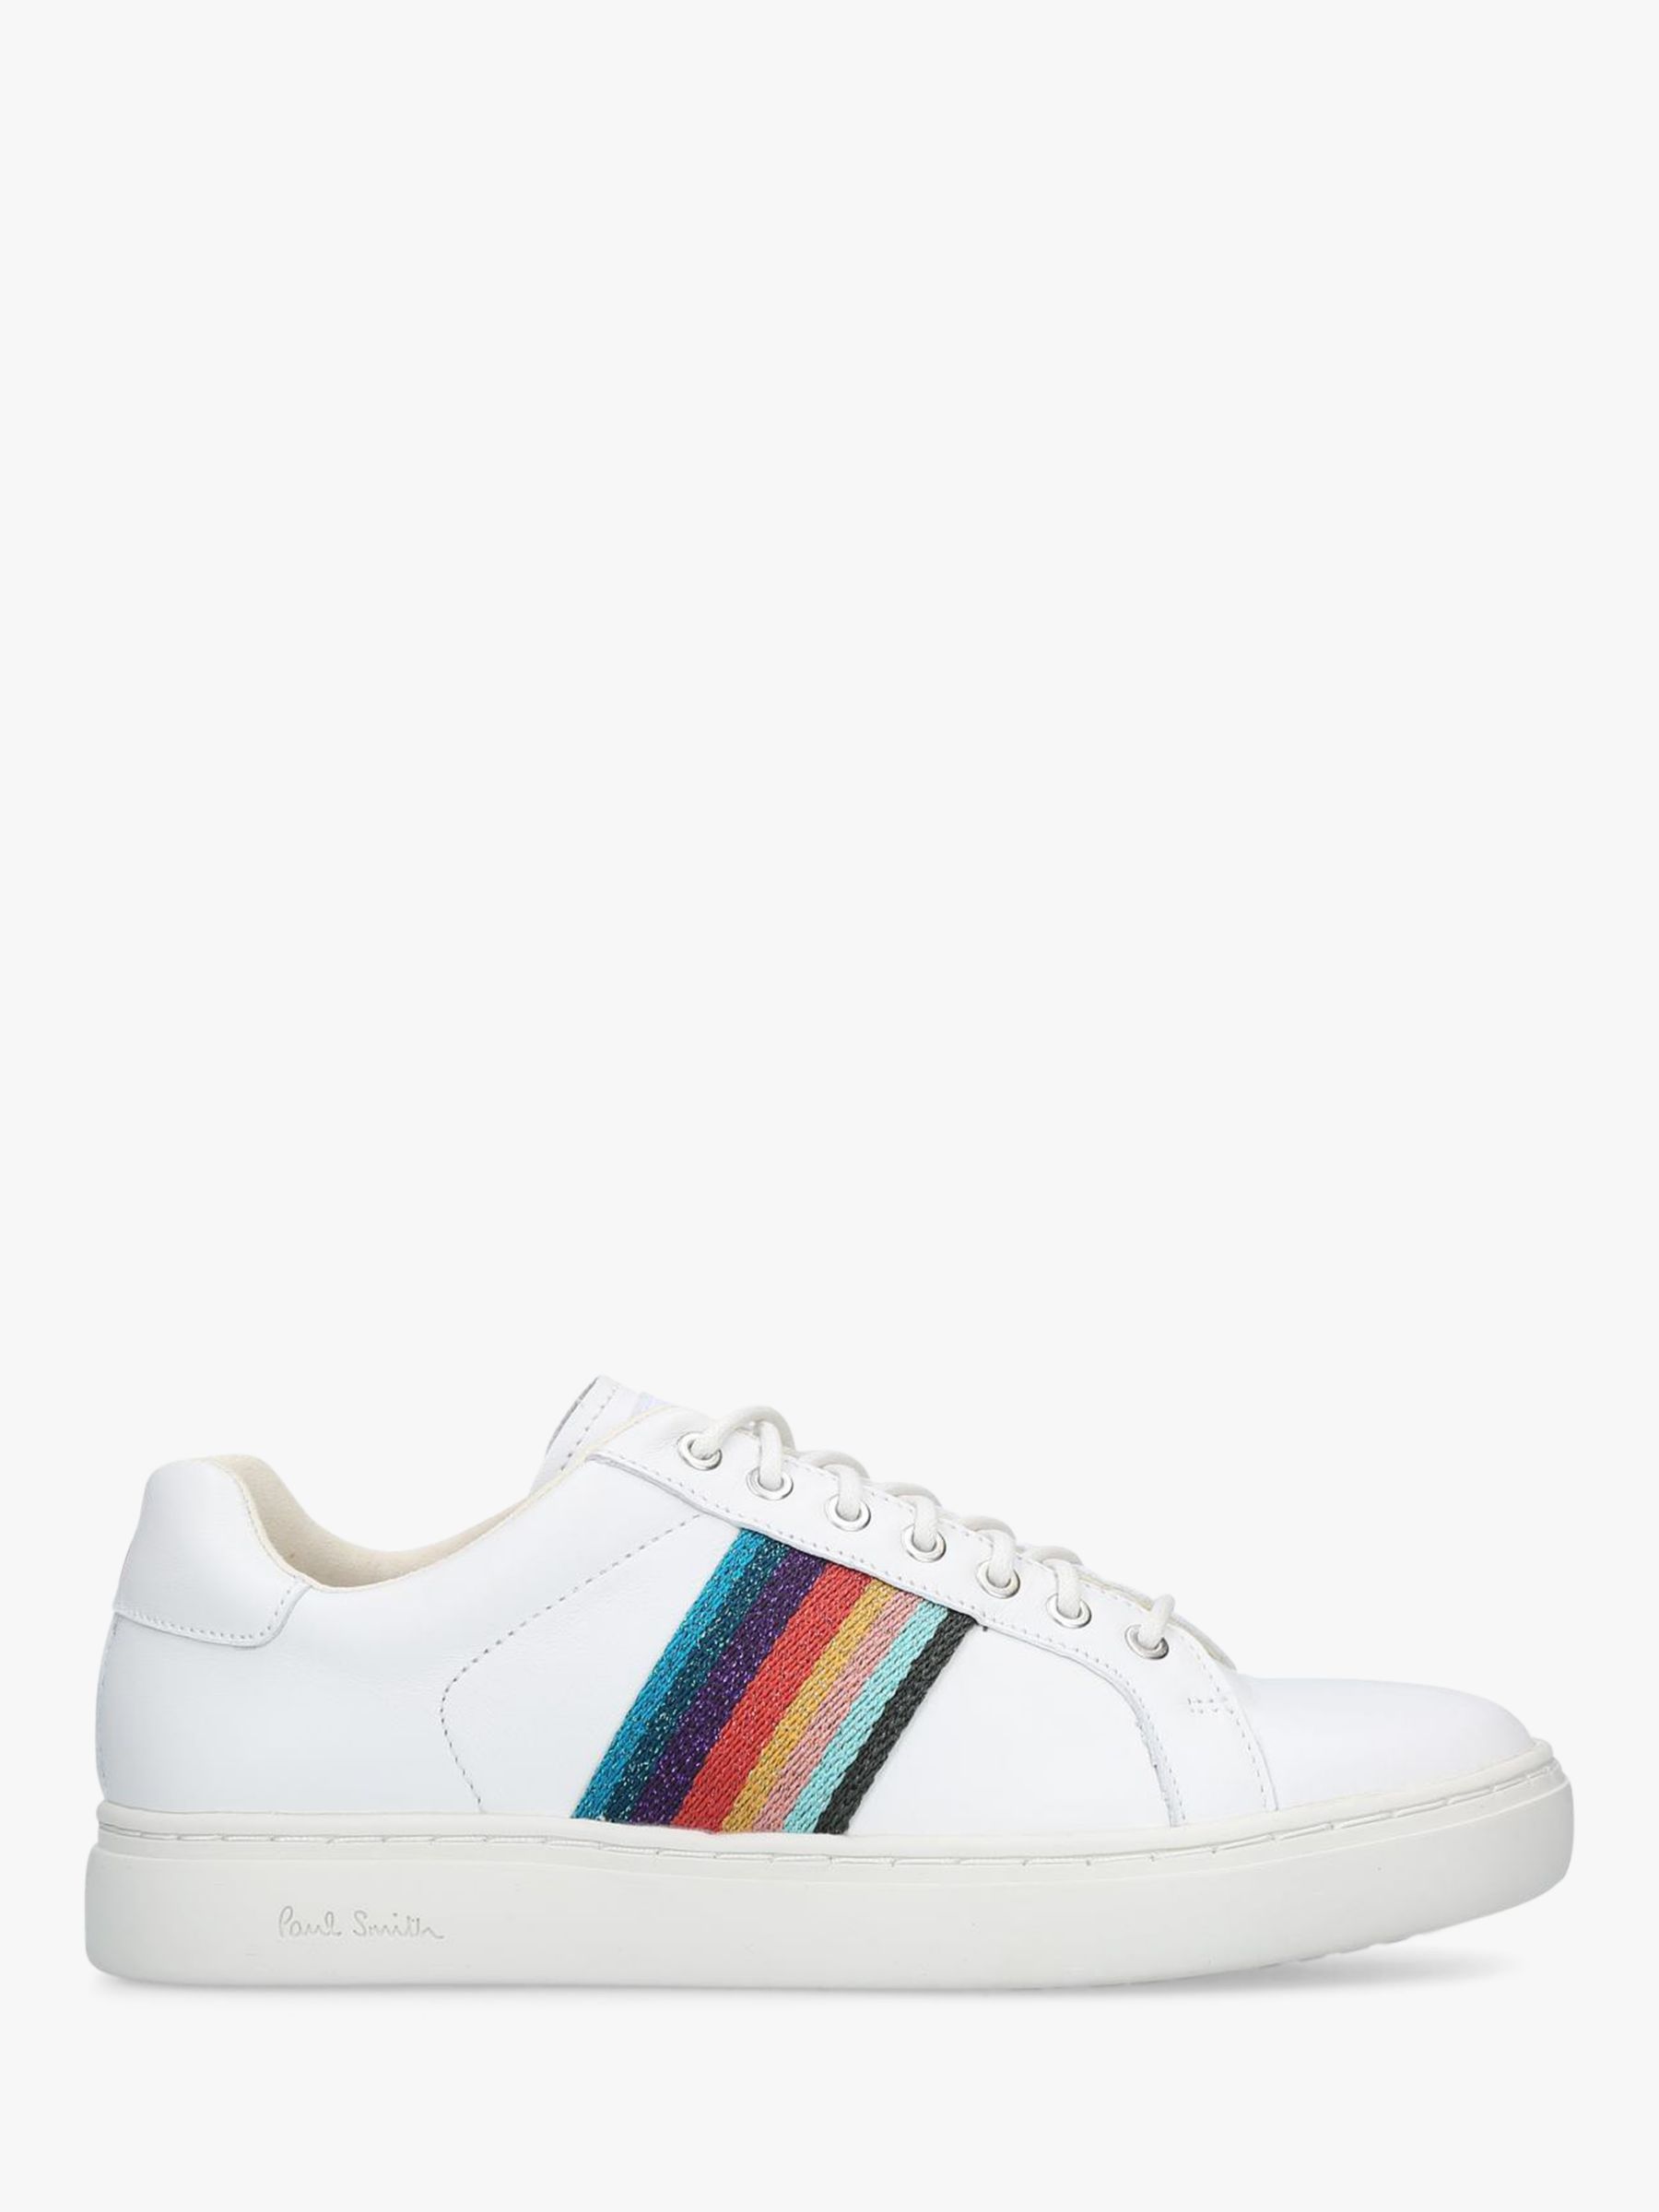 paul smith sneakers womens